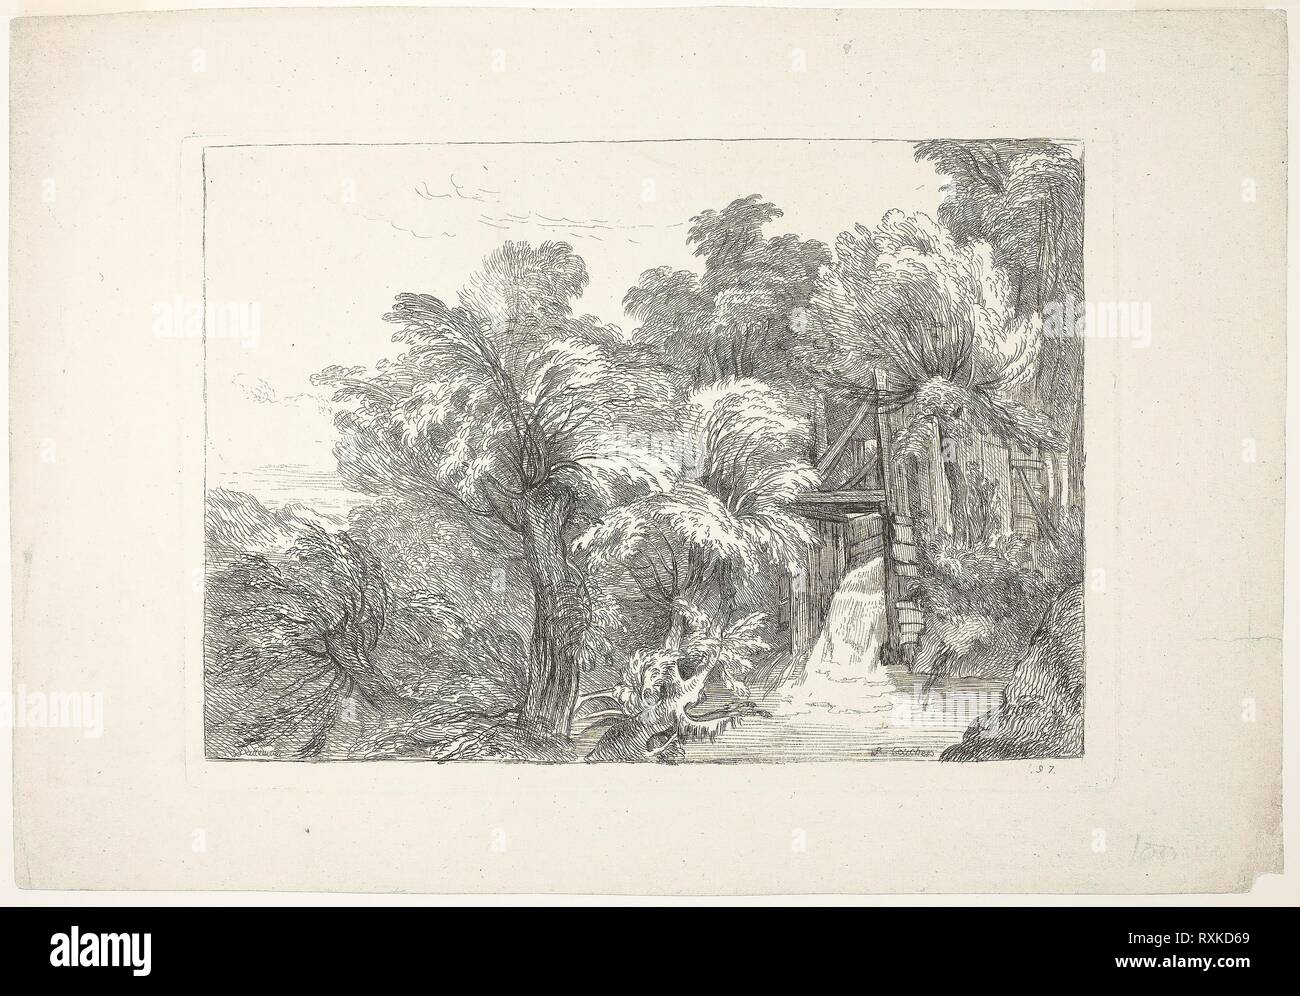 A Mill Lock in the Middle of Willows, plate 97 from Figures de différents caractères, de Paysages, et d'Etudes dessinées d'après nature (Figures of Different Characters, Landscapes, and Studies Drawn from Nature). François Boucher (French, 1703-1770); after Jean Antoine Watteau (French, 1684-1721). Date: 1726. Dimensions: 215 × 308 mm (image); 230 × 328 mm (plate). Etching on ivory laid paper. Origin: France. Museum: The Chicago Art Institute. Author: Francois Boucher. Stock Photo